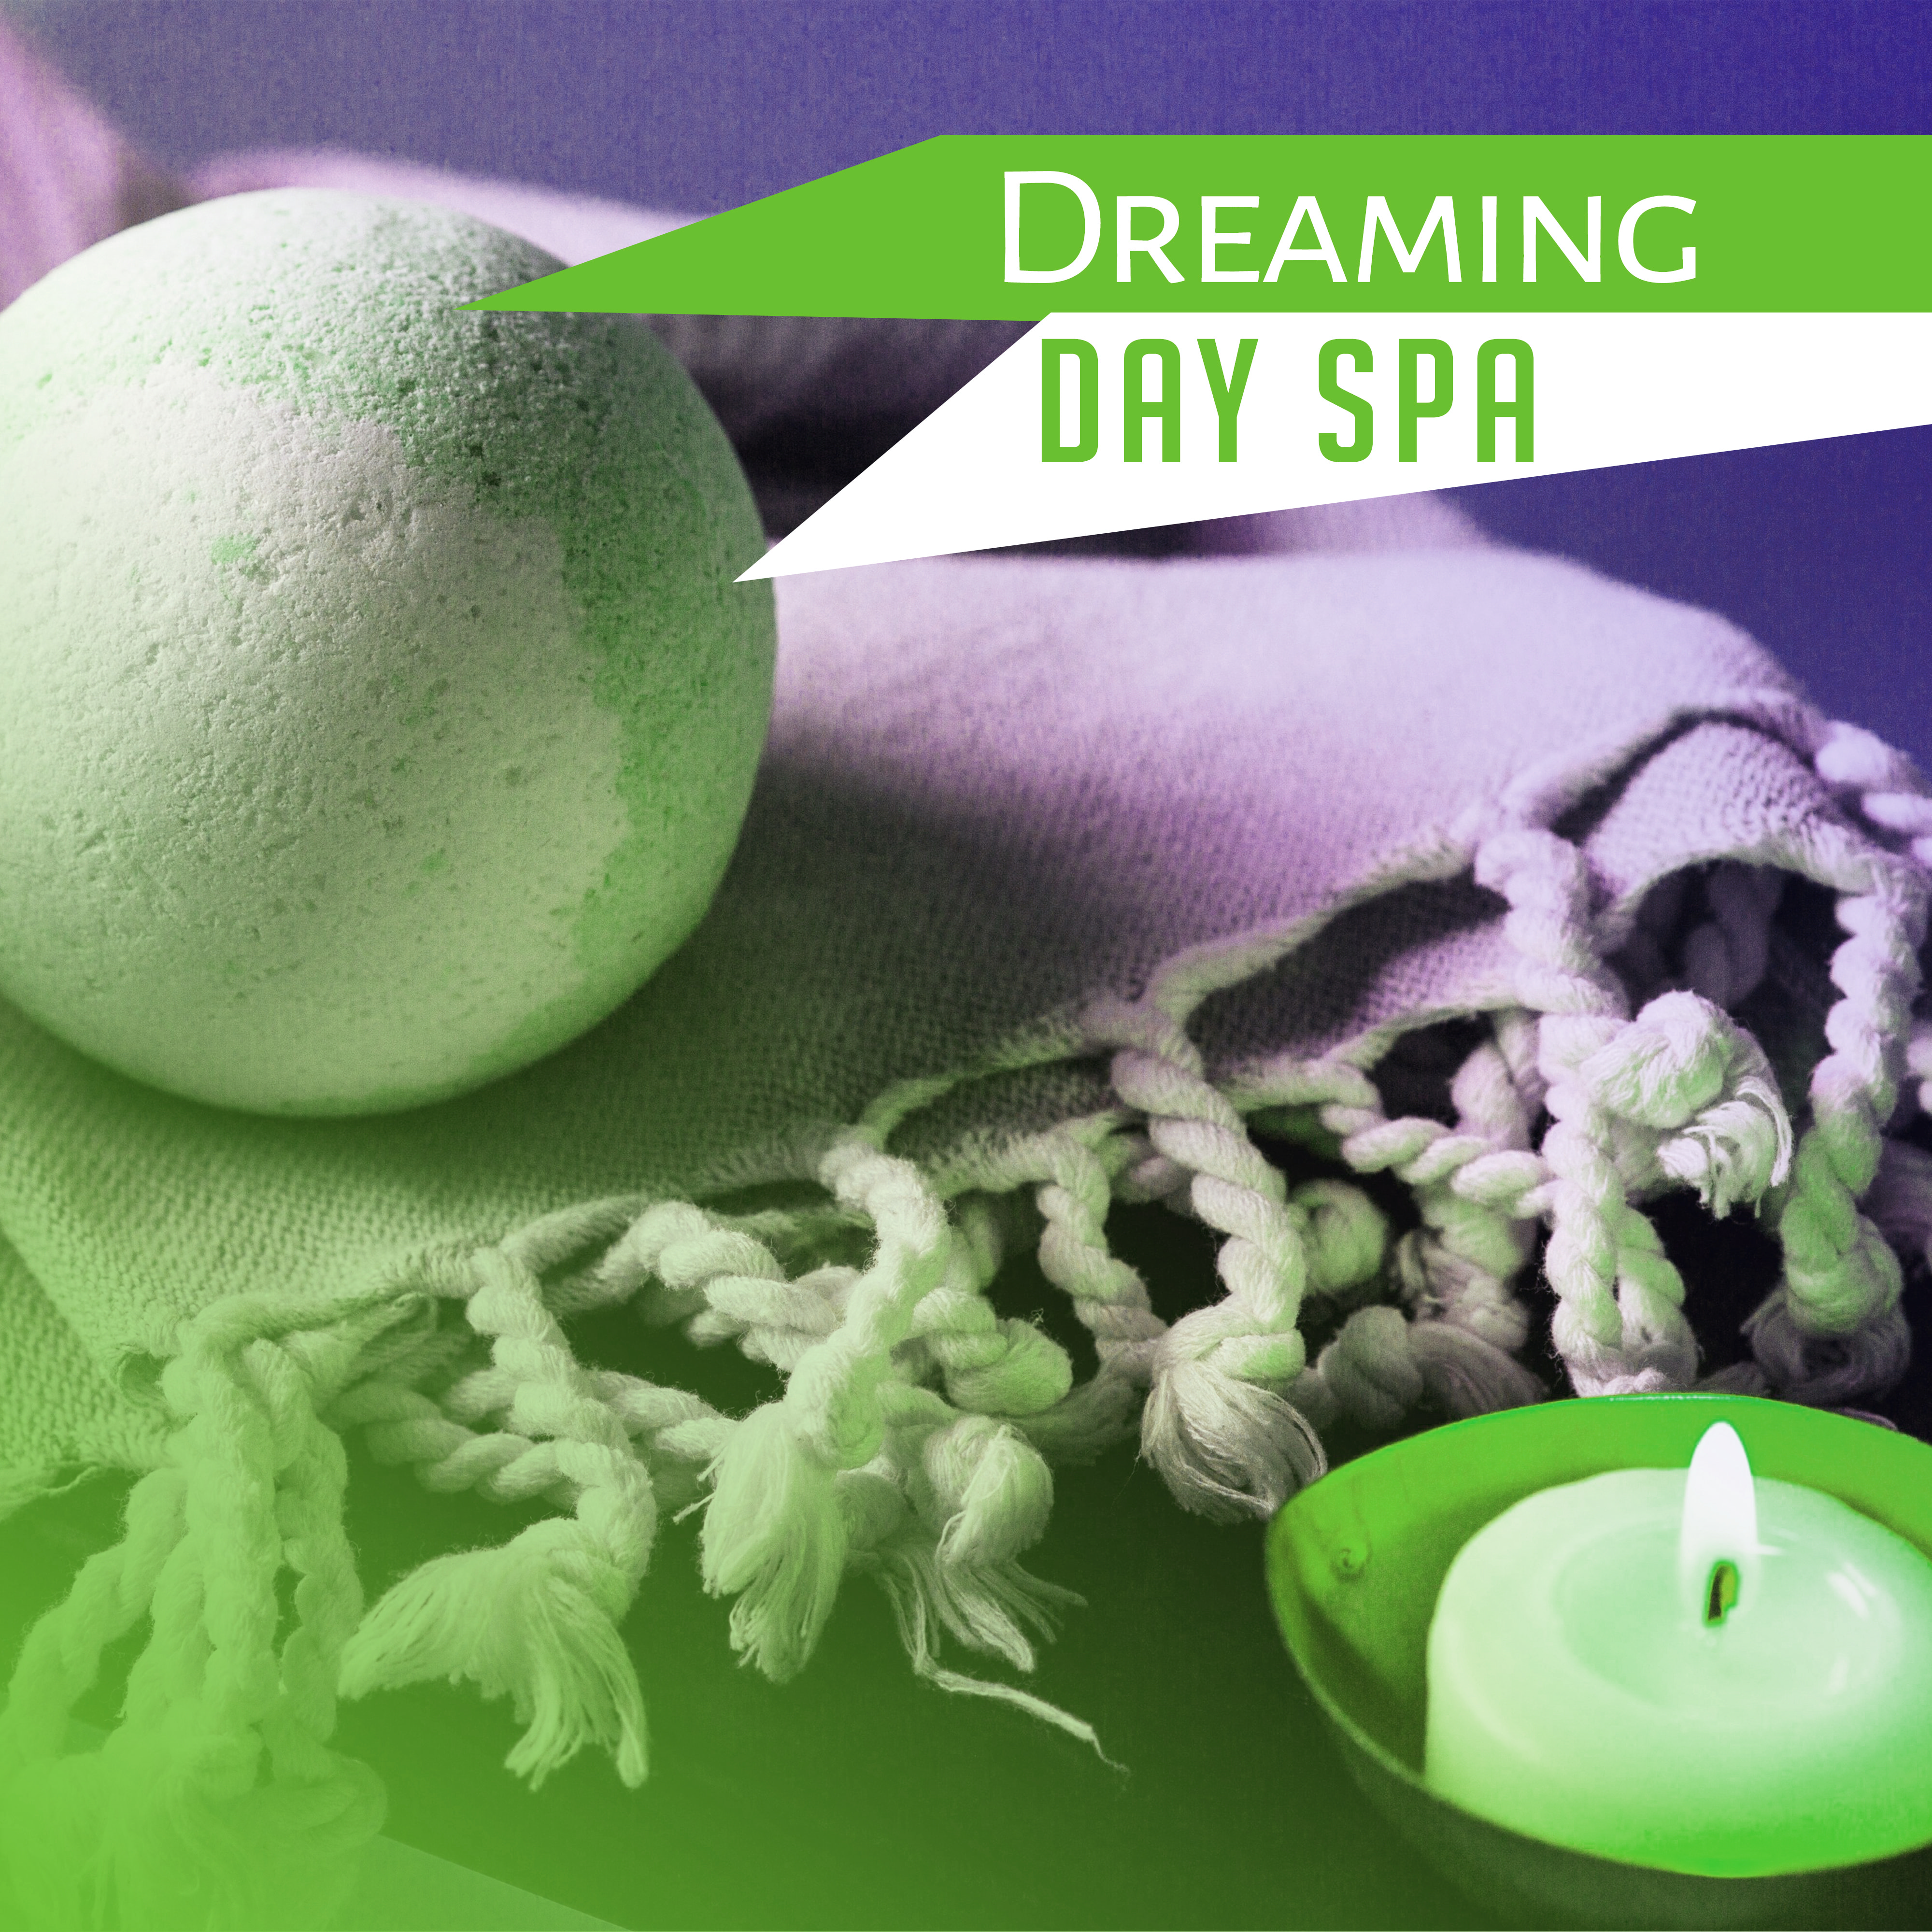 Dreaming Day Spa – Relaxation & Spa, Nature Sounds, Deep Relaxation, Wellness, Massage